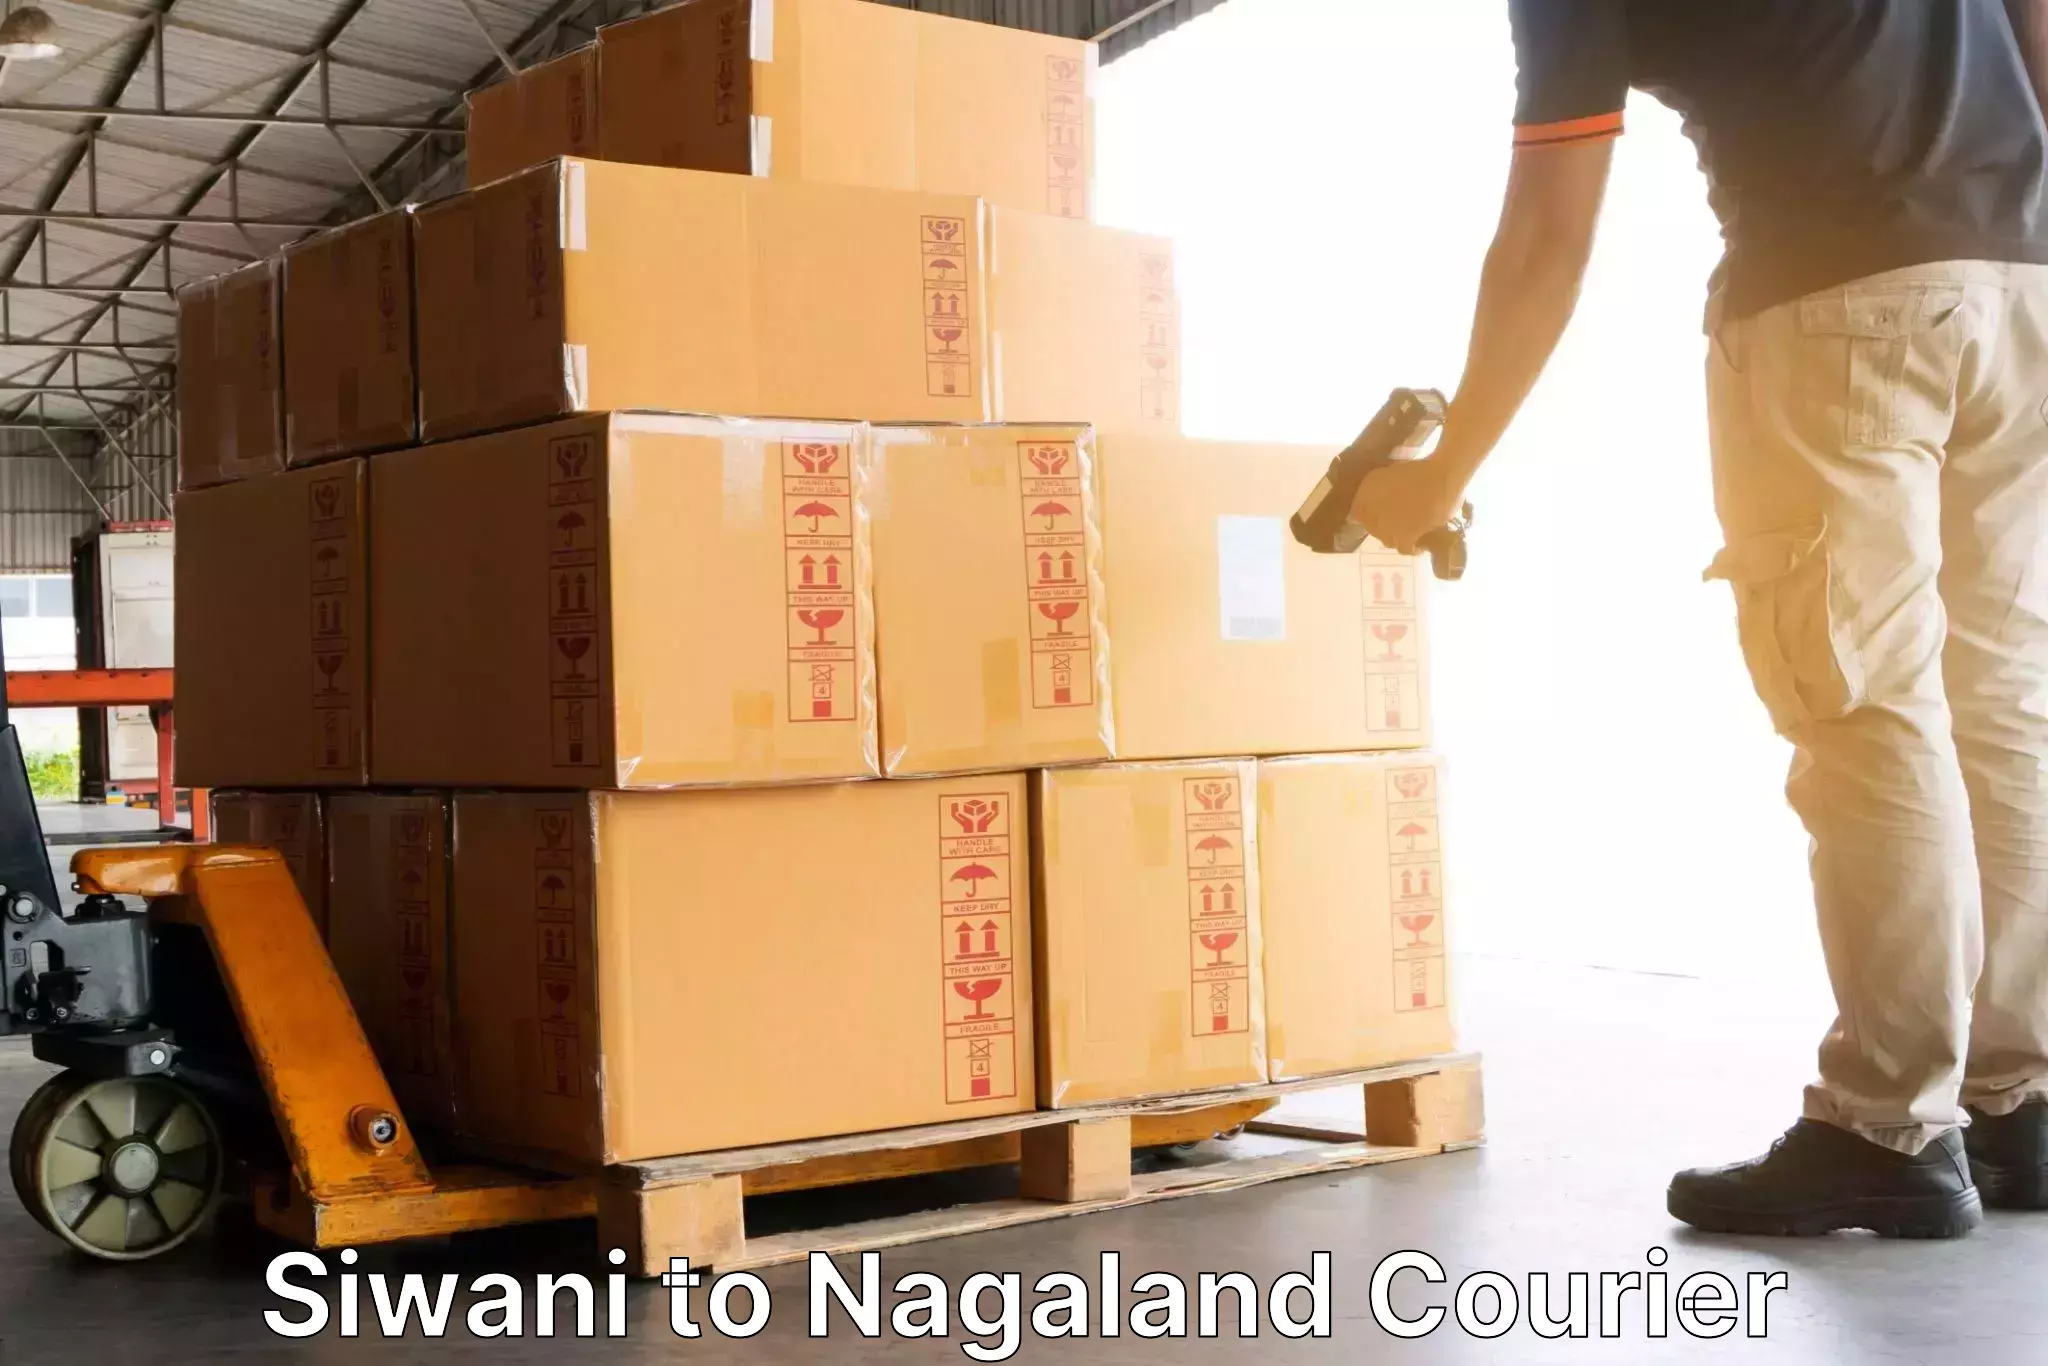 Package delivery network Siwani to Chumukedima